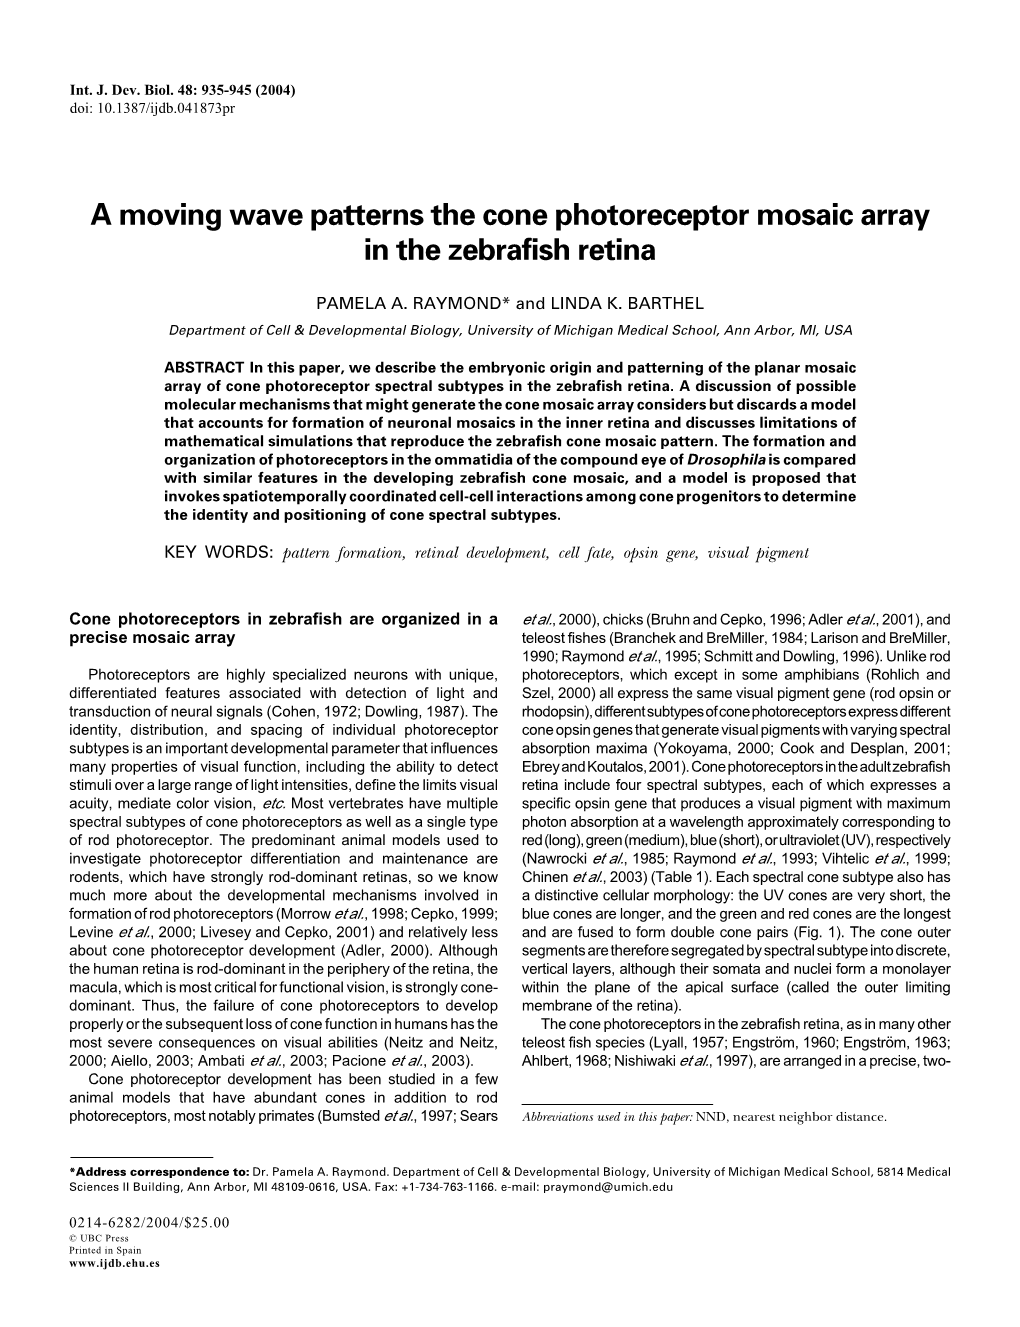 A Moving Wave Patterns the Cone Photoreceptor Mosaic Array in the Zebrafish Retina